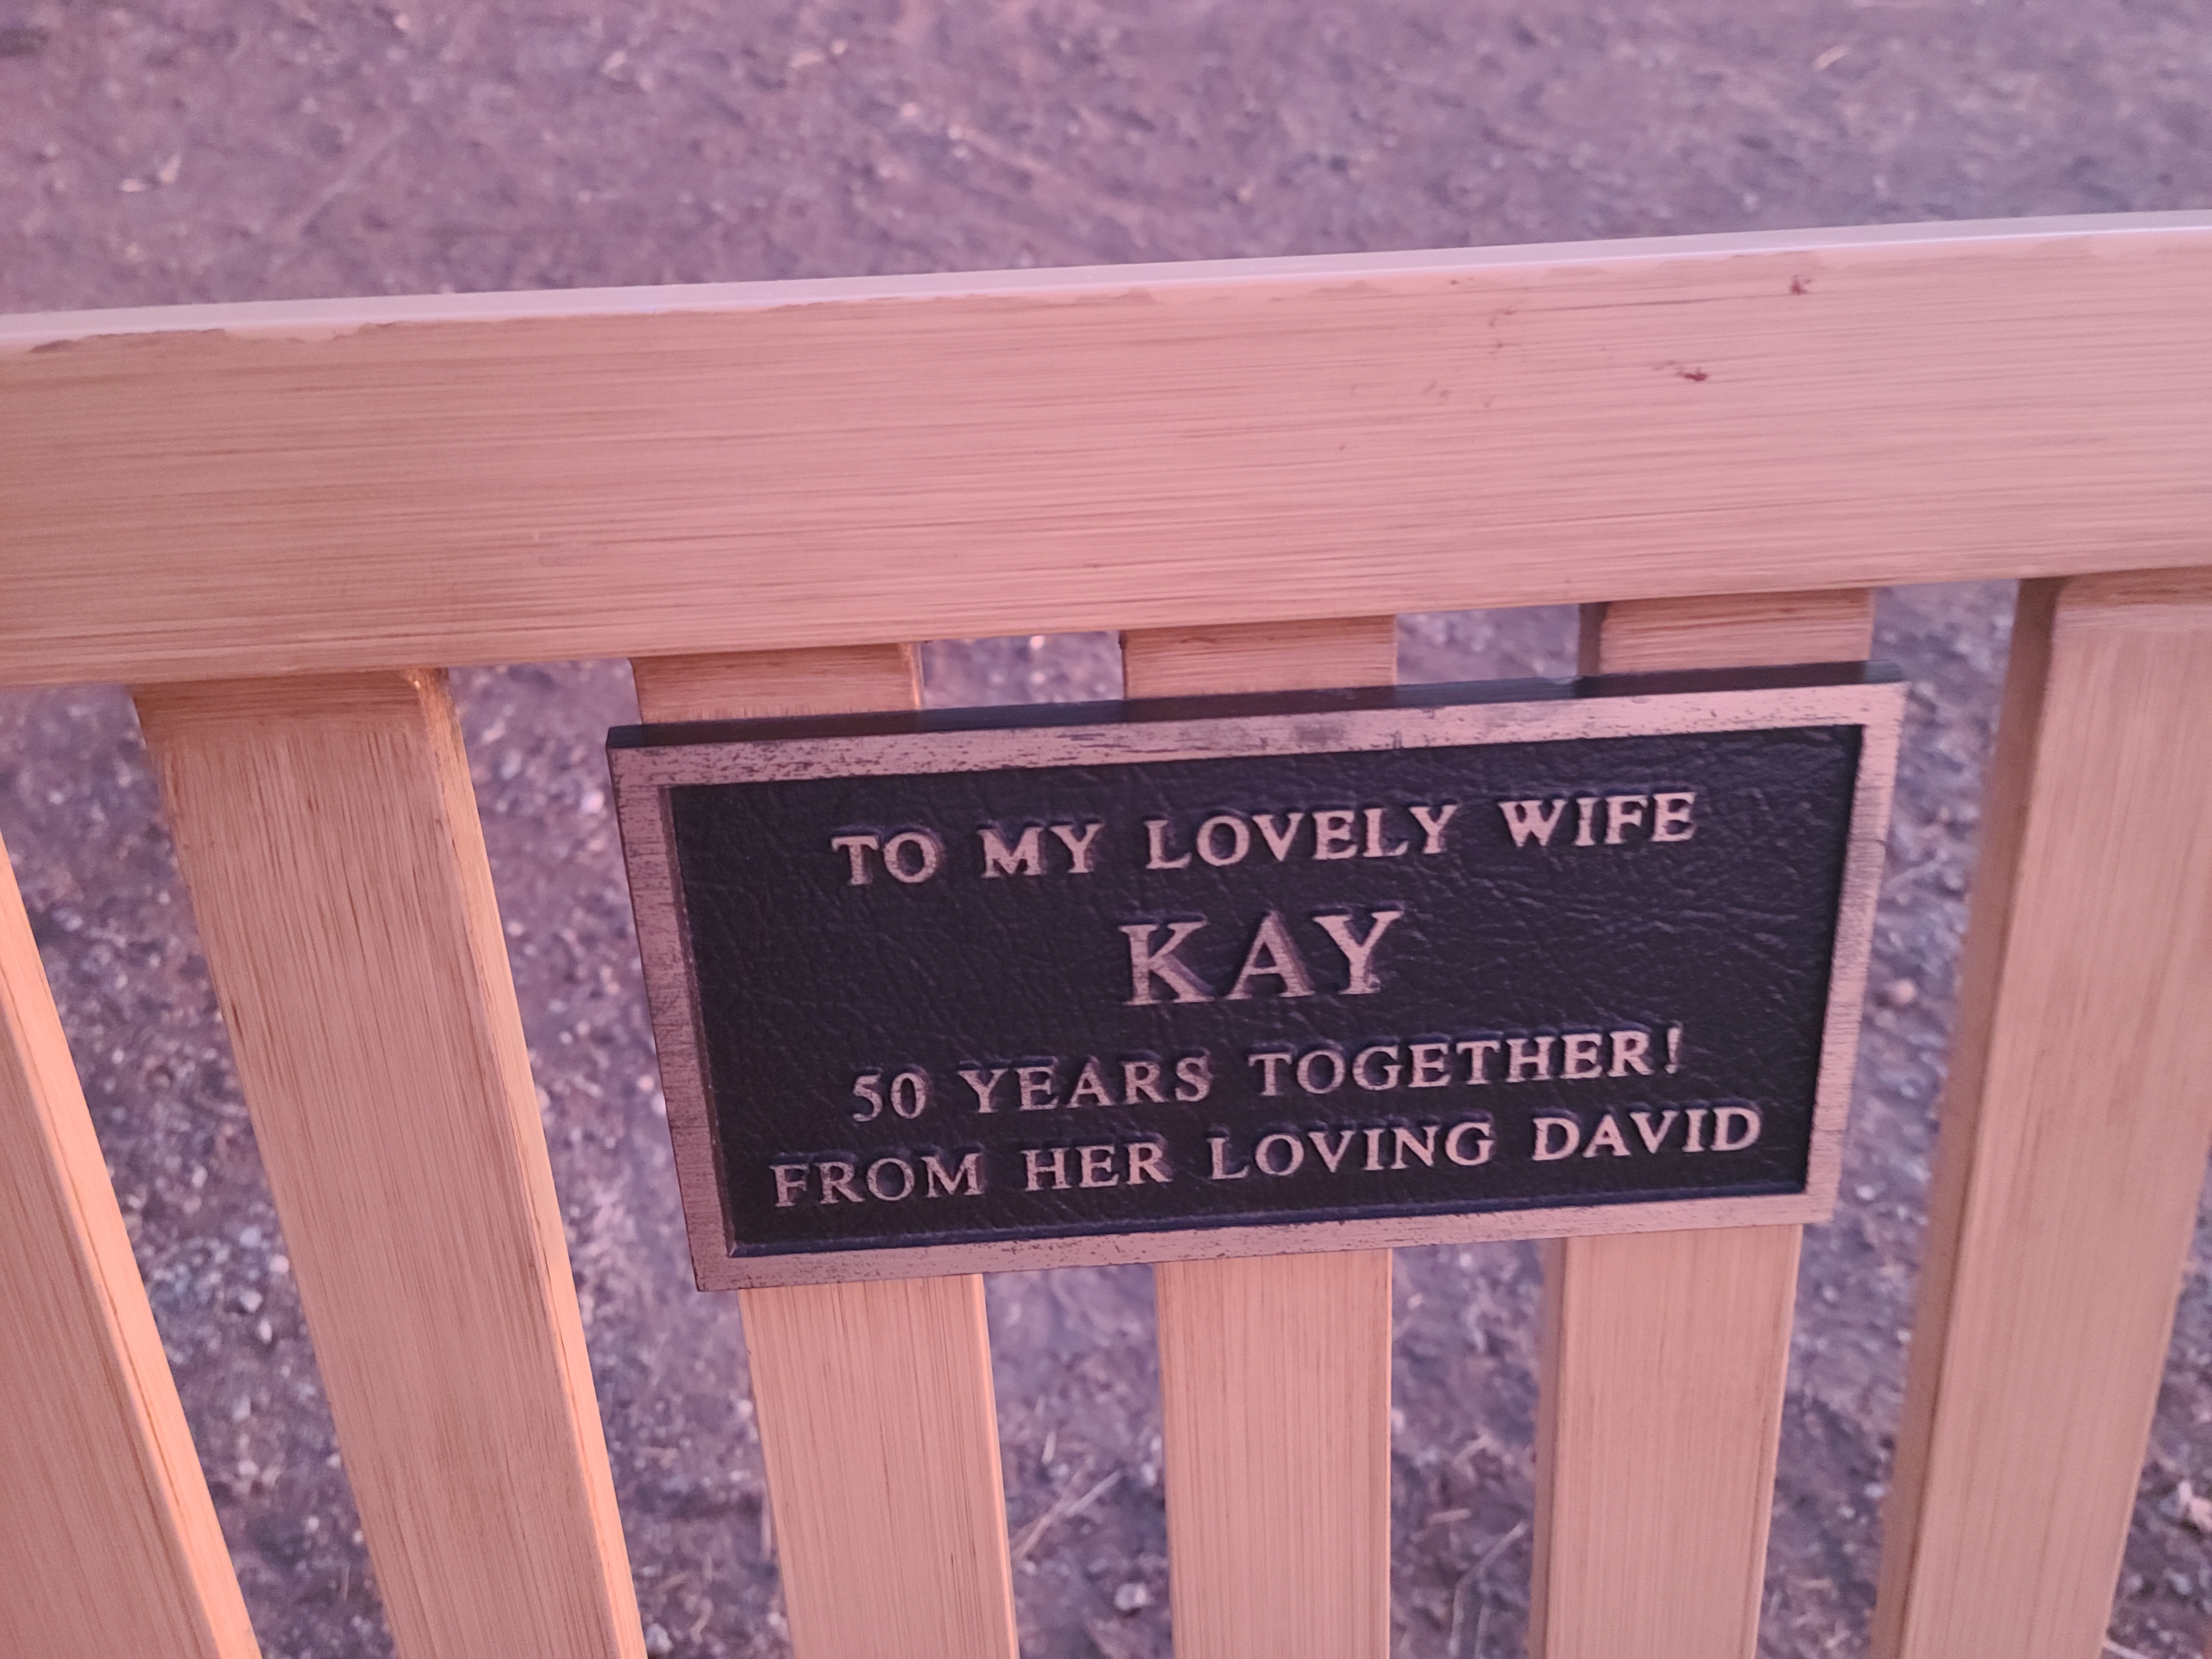 Bench Plaque lit by sunset colors: To My Lovely Wife KAY. 50 Years together! From Her Loving DAVID